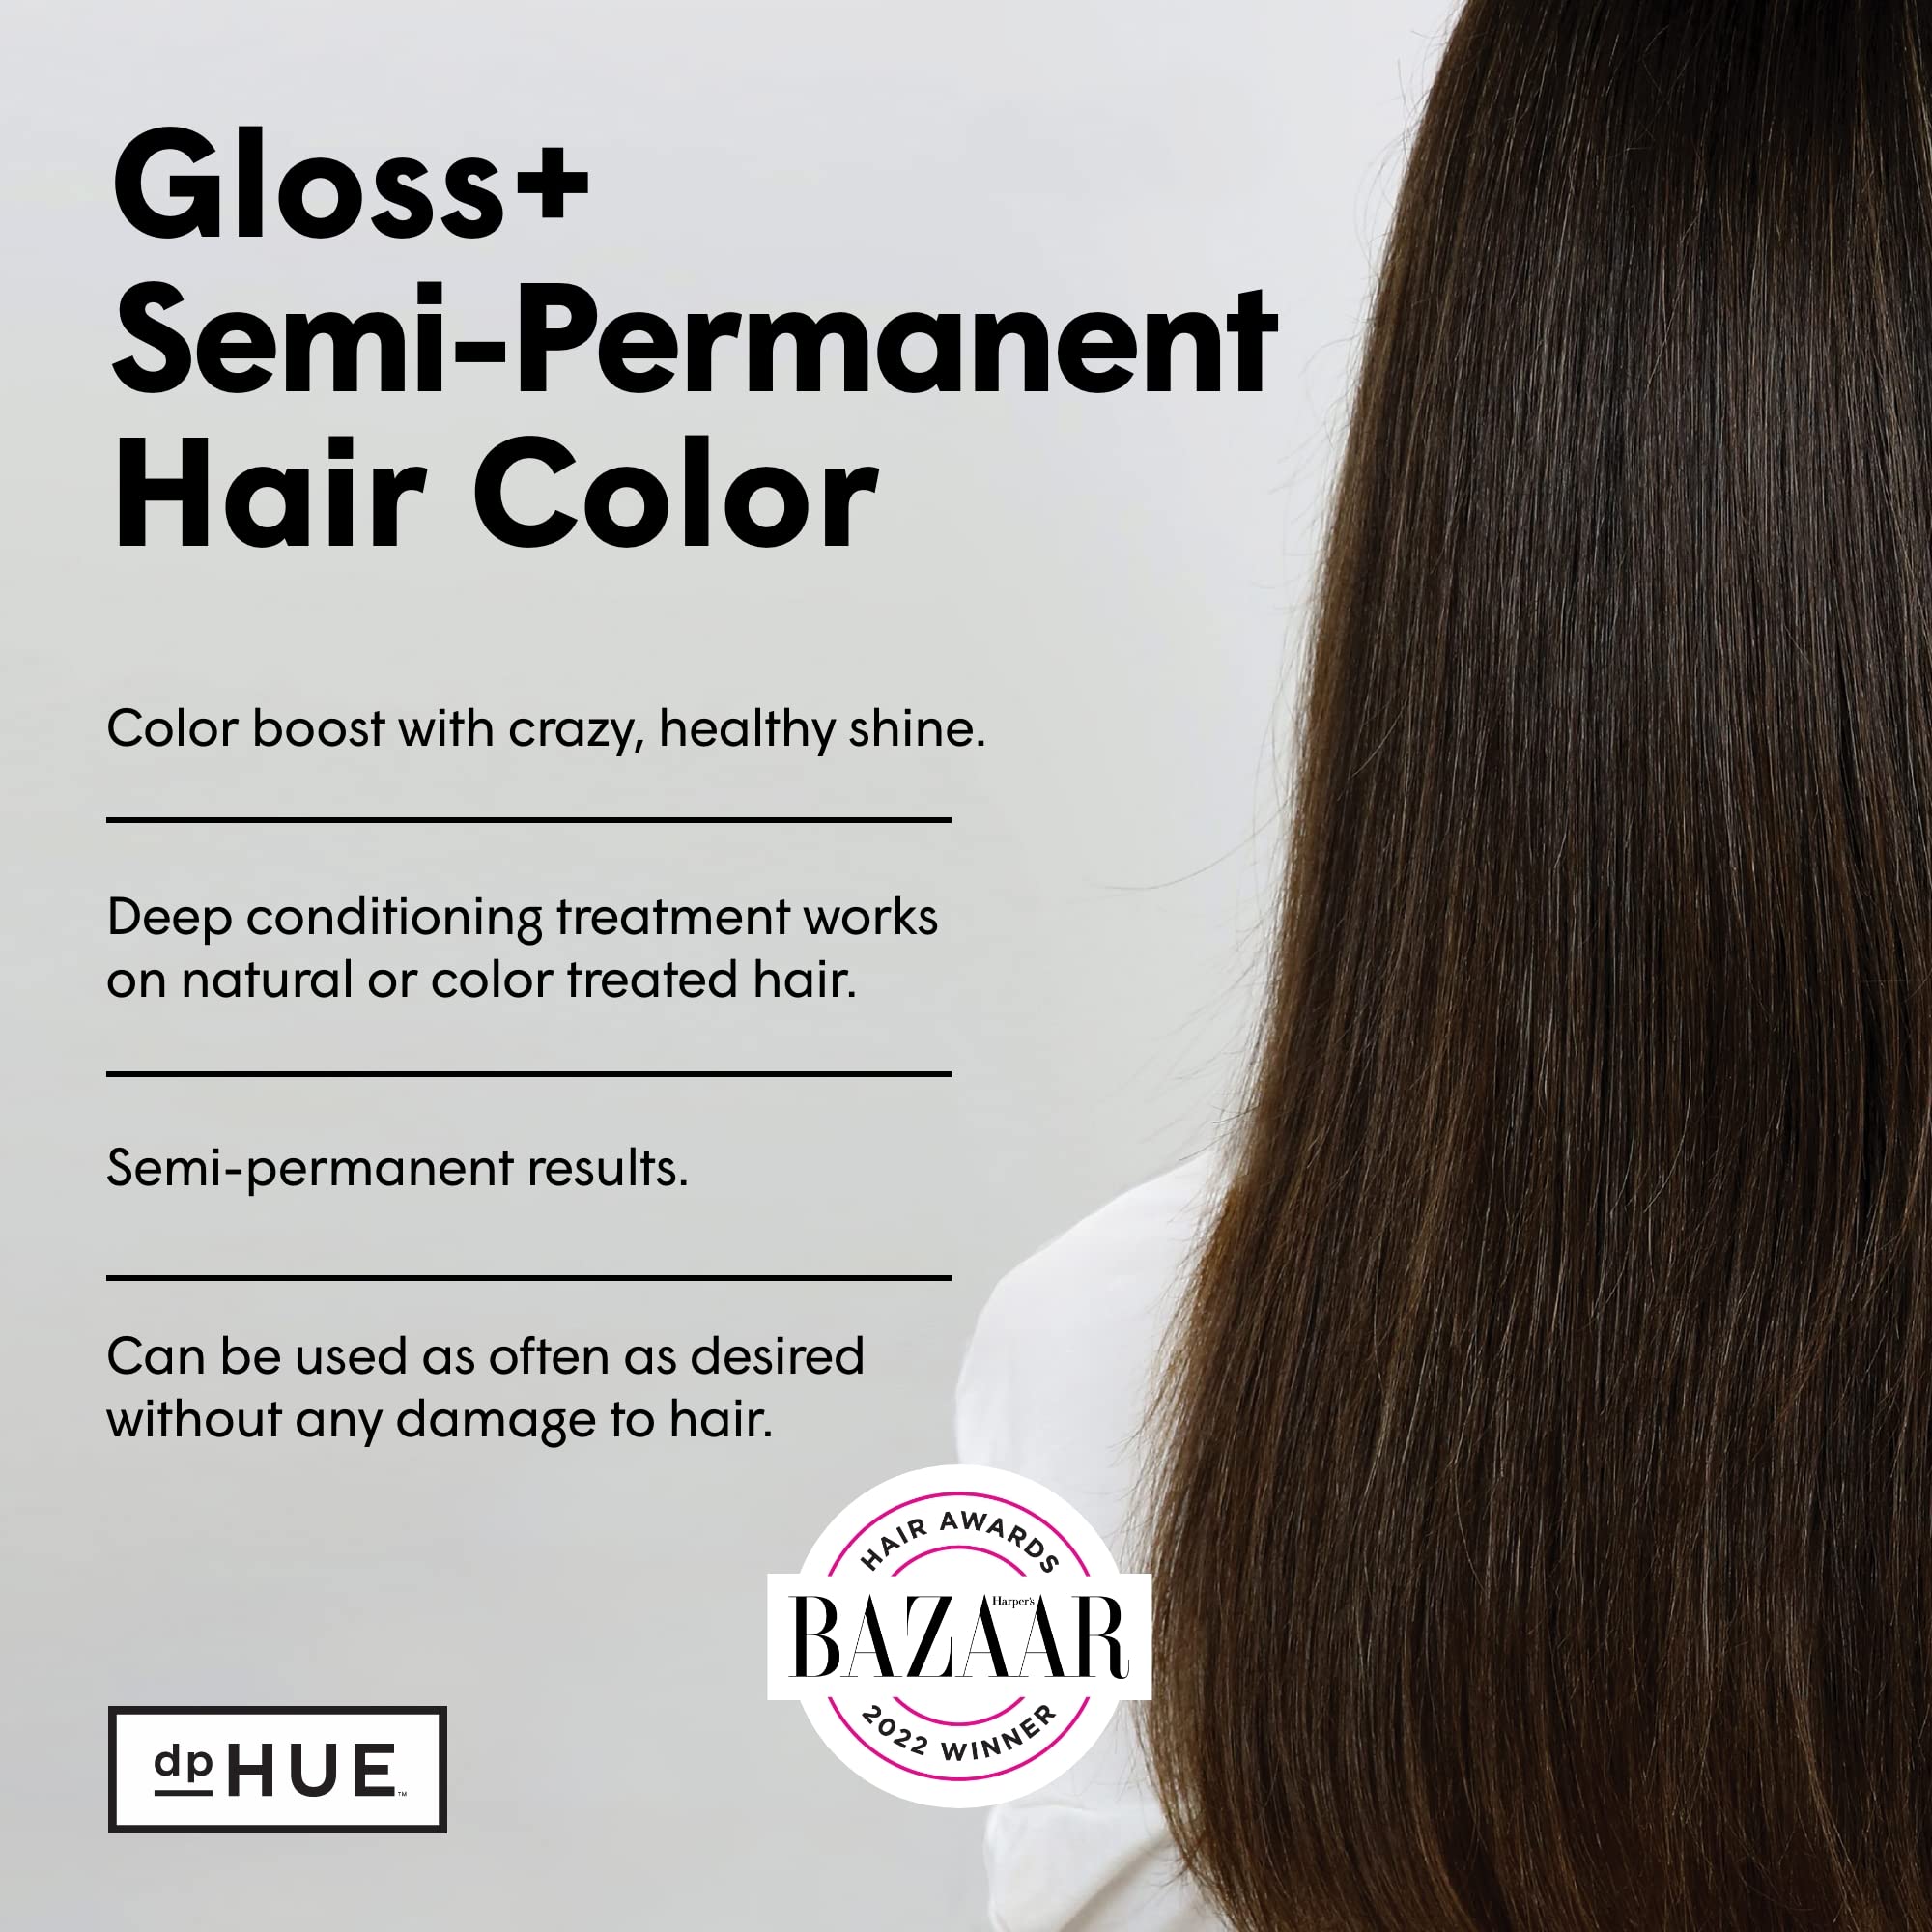 Mua dpHUE Gloss+ Medium Brown Semi-Permanent Hair Color & Conditioner,   oz - Color Boost with Healthy Shine - Deep Conditioning Treatment - No  Peroxide, Ammonia or Mixing - Gluten-Free, Vegan trên